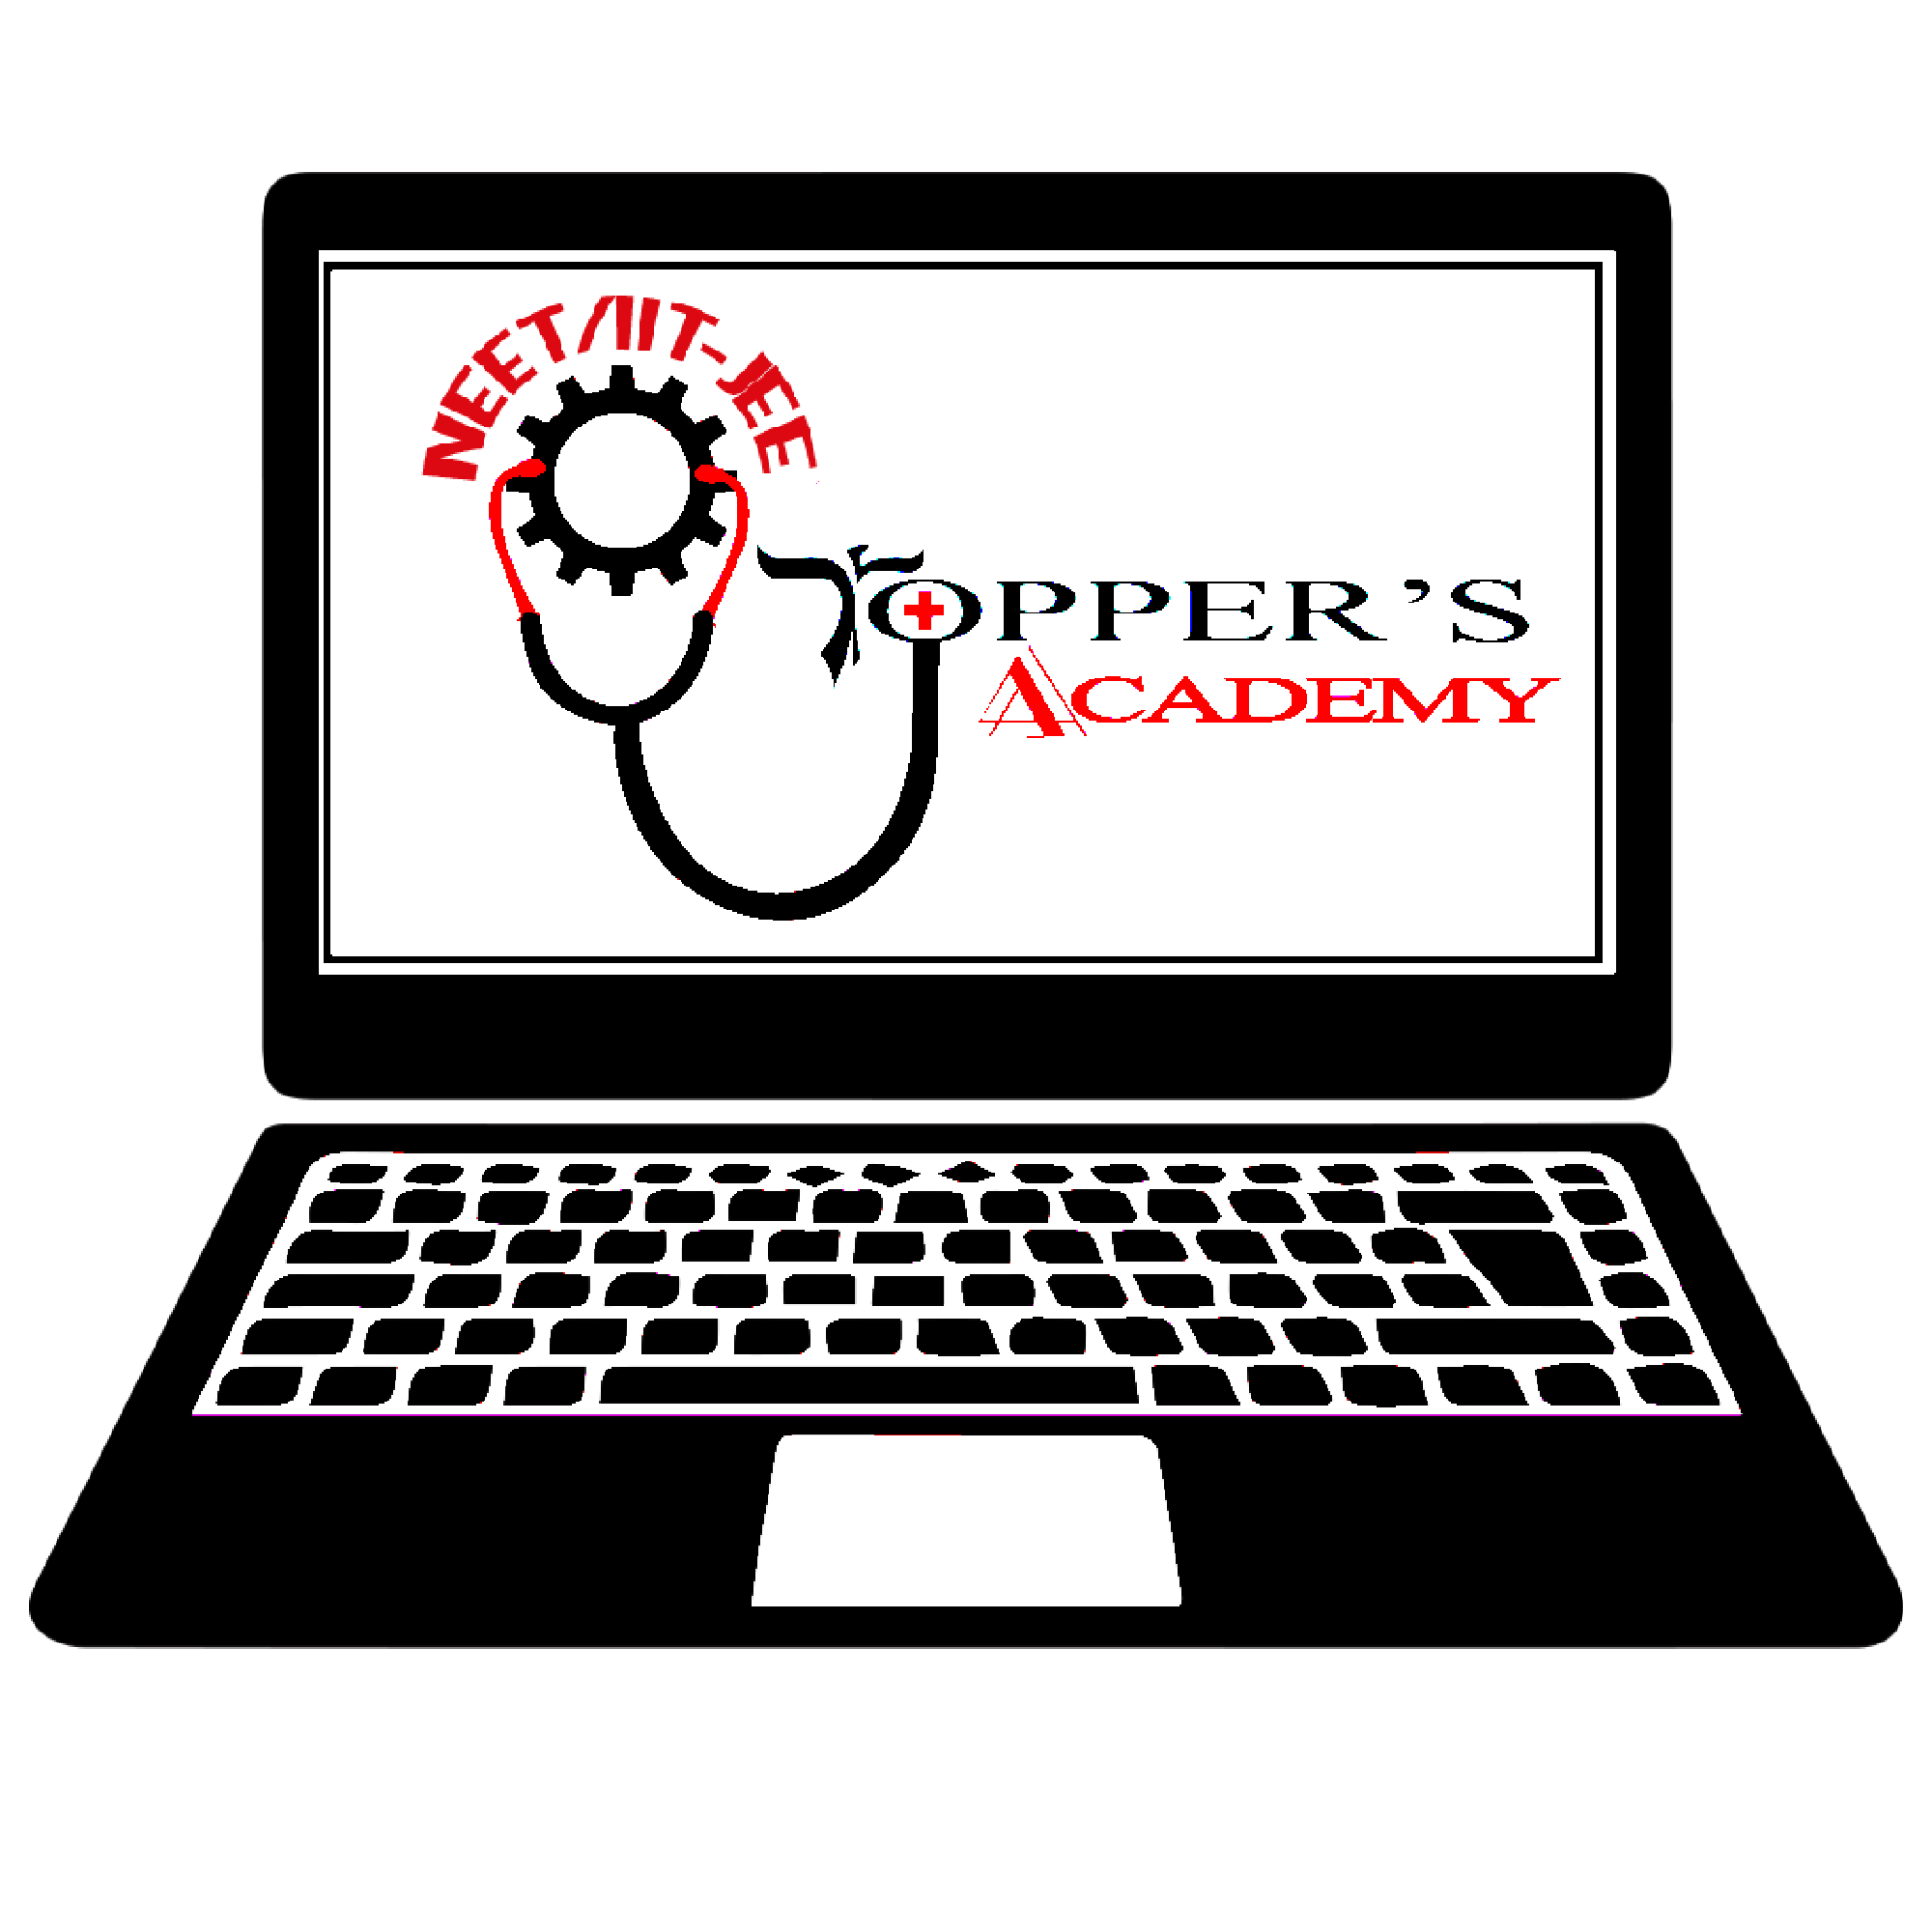 Toppers Academy logo